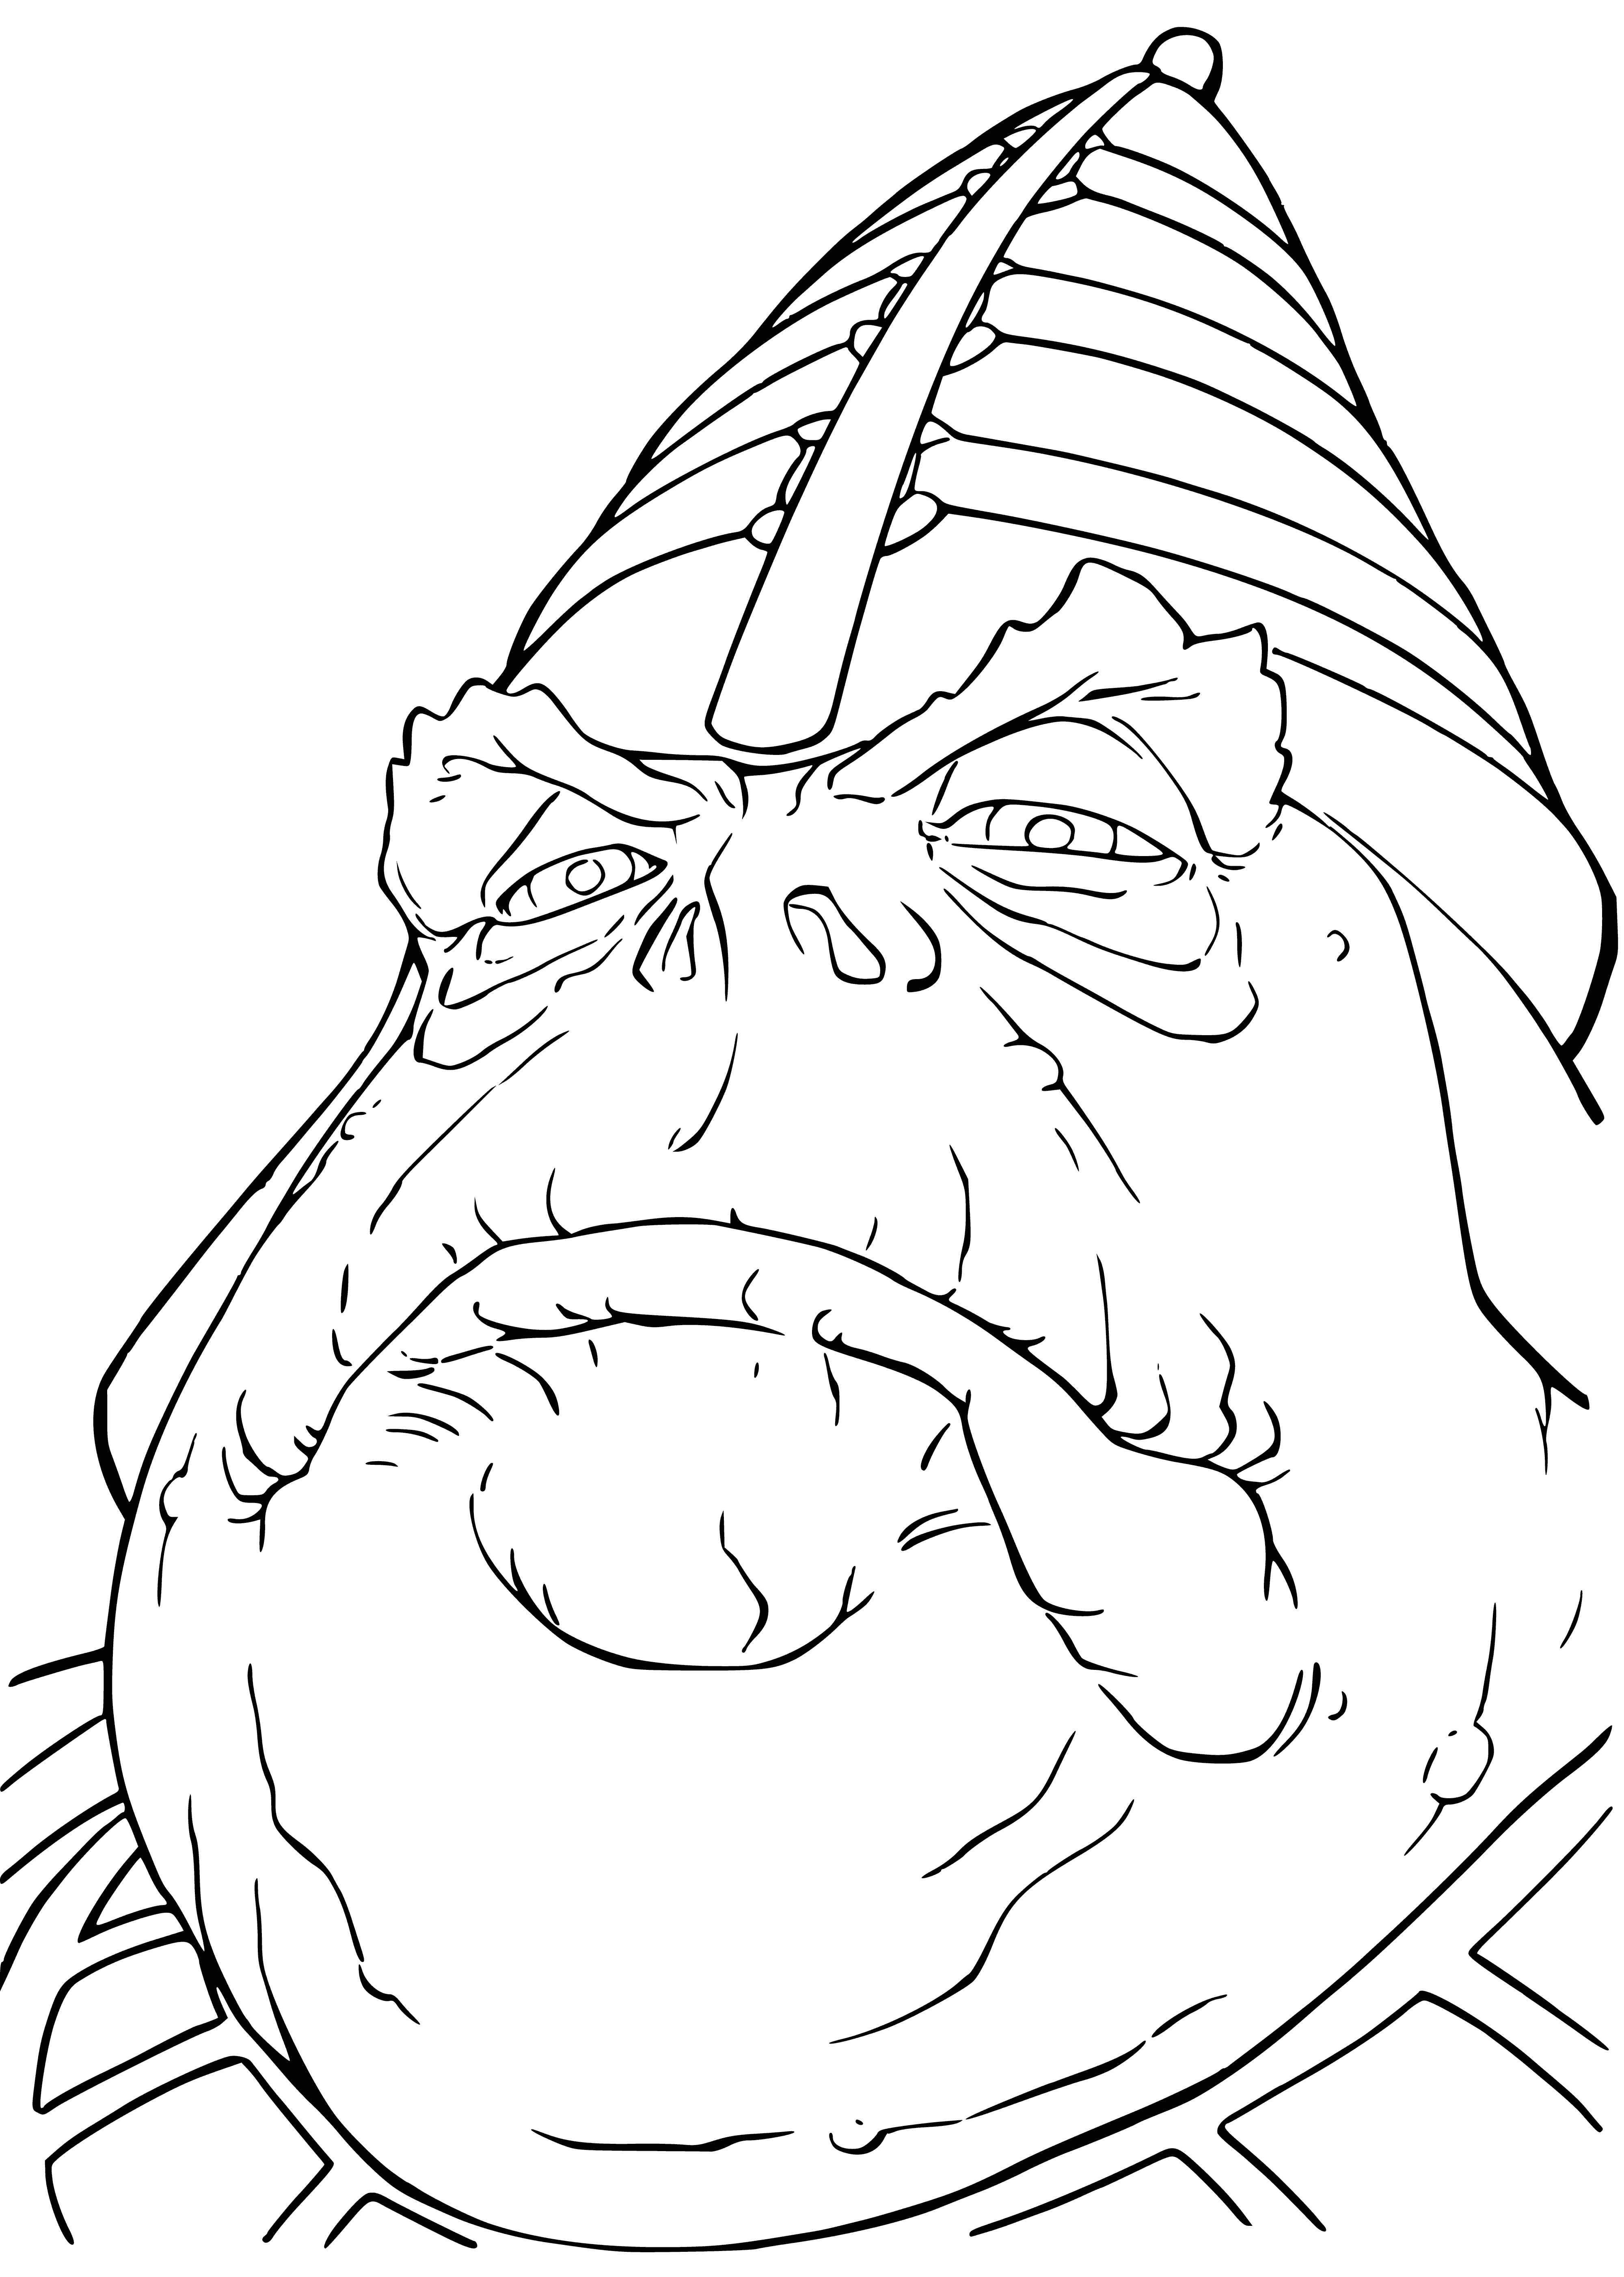 coloring page: Alien king with headdress, staff and throne - looking down off-screen.